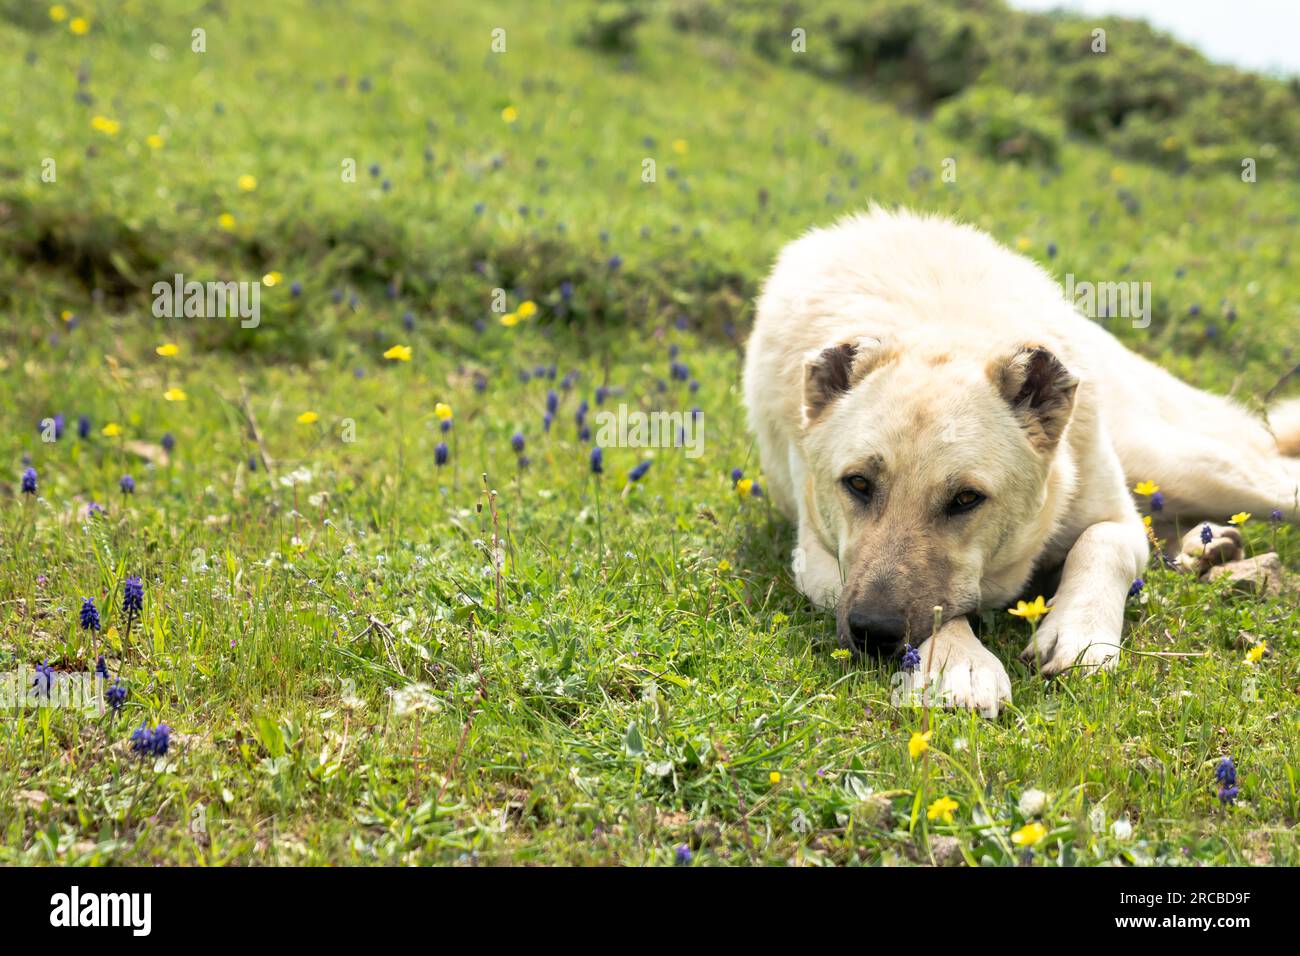 An Anatolian shepherd's dog standing in the field. shepherd dog ensures the safety of the herd Stock Photo